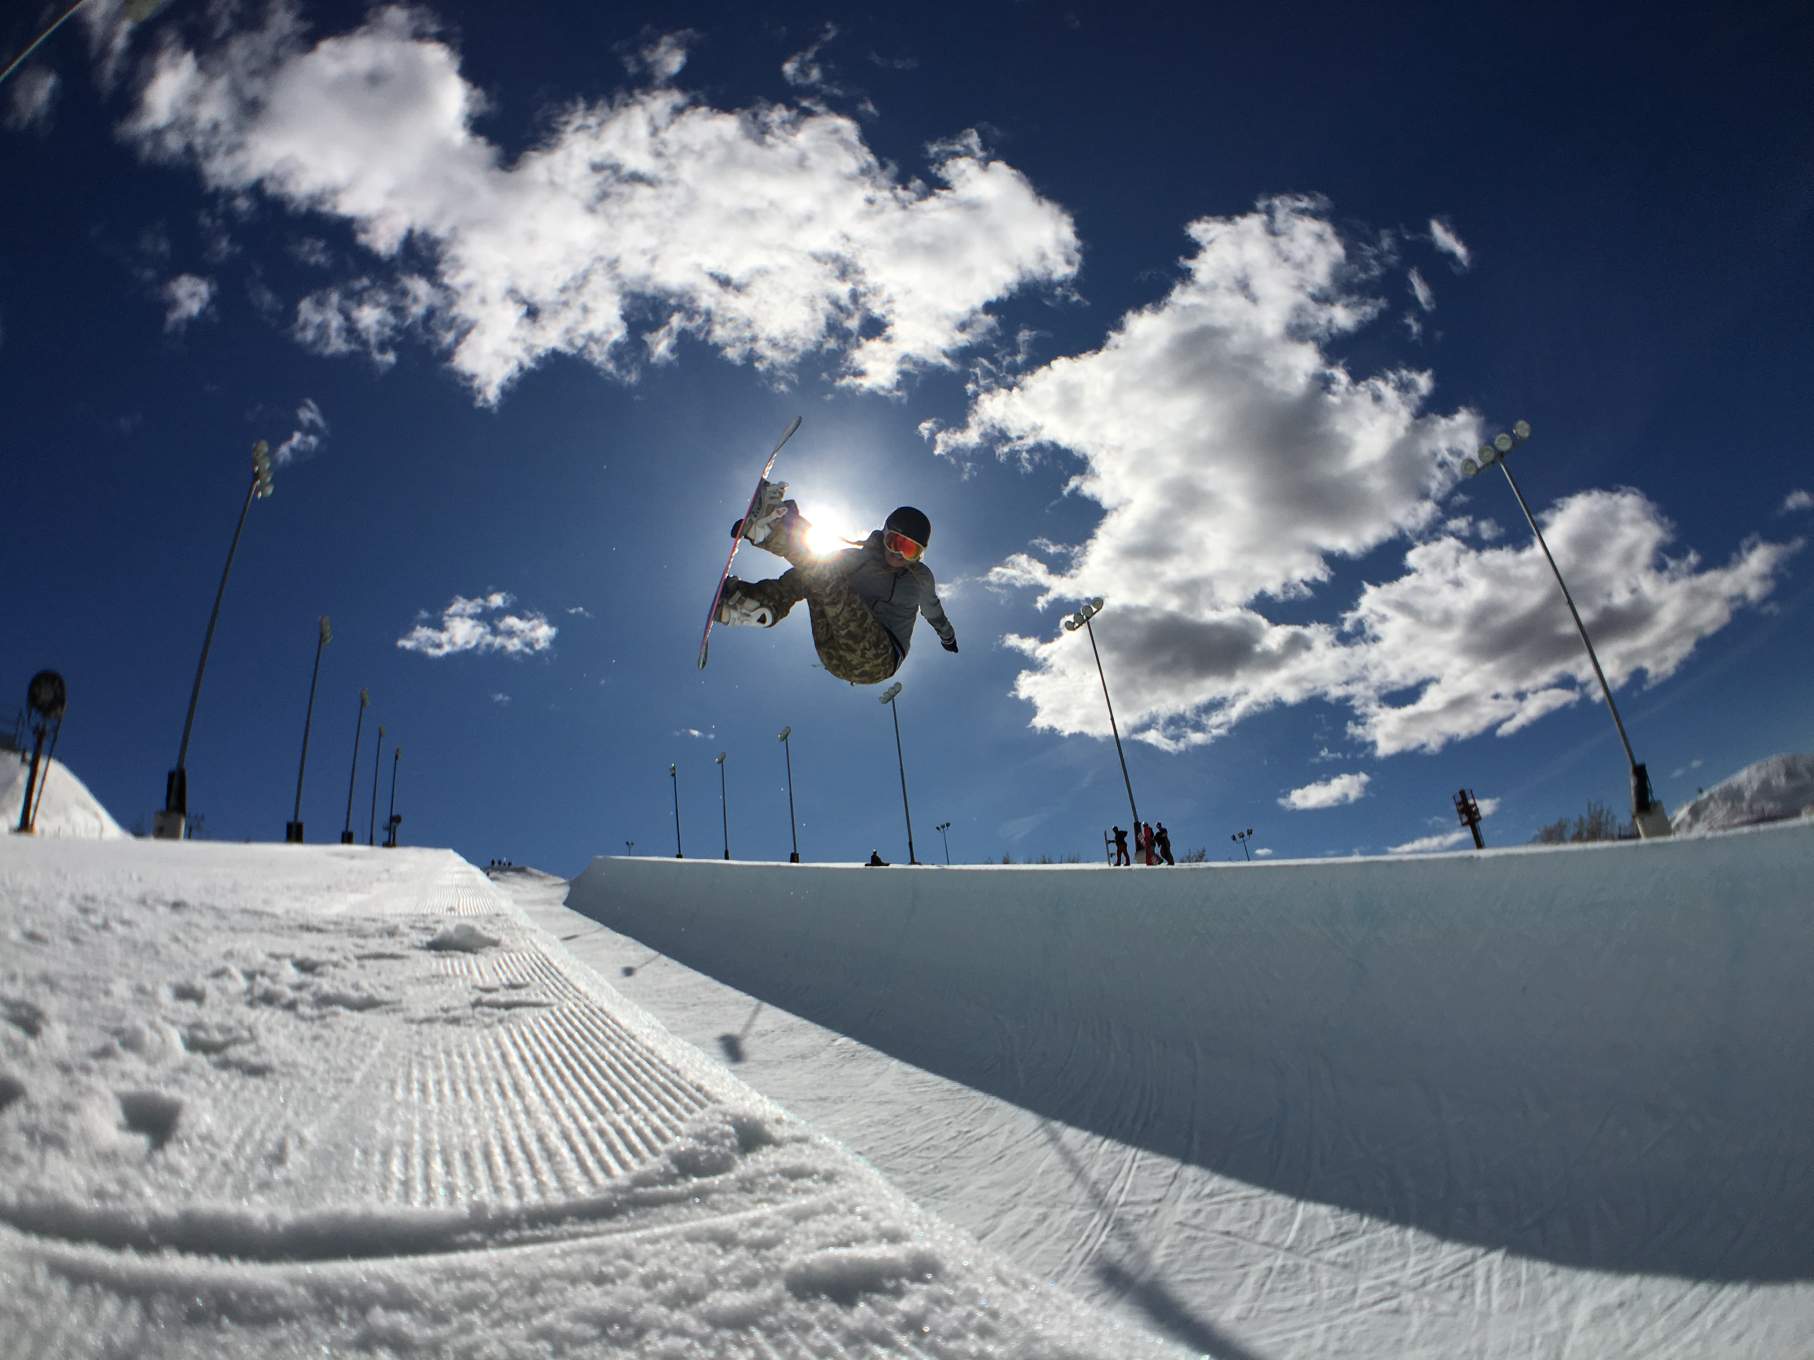 Mercedes Nicoll getting air in the halfpipe